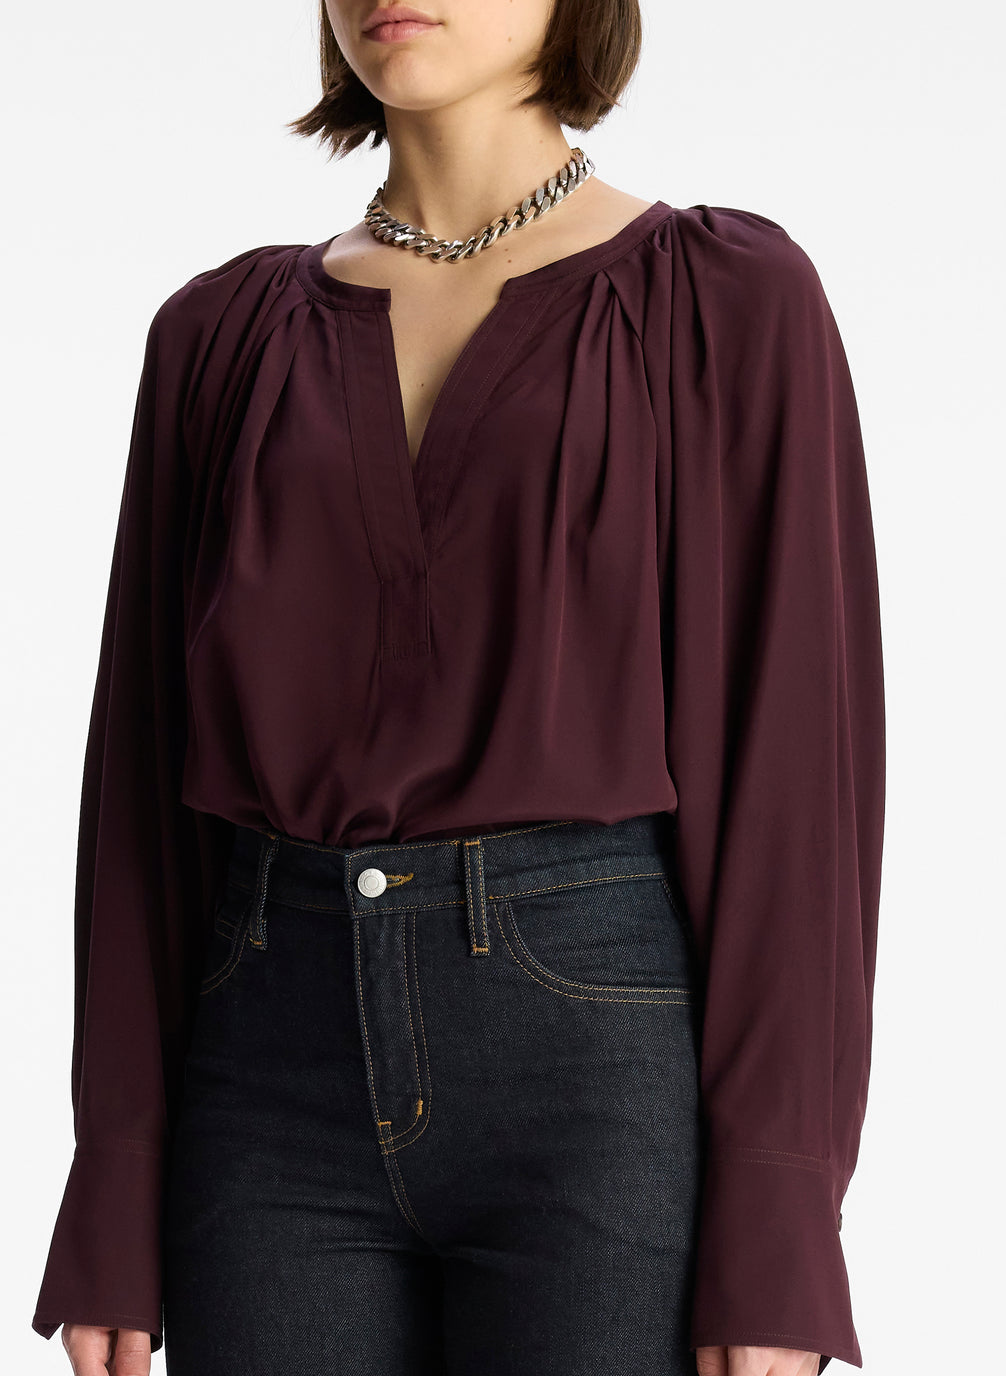 detail view of woman wearing burgundy v neck long sleeve silk top and dark wash denim jeans